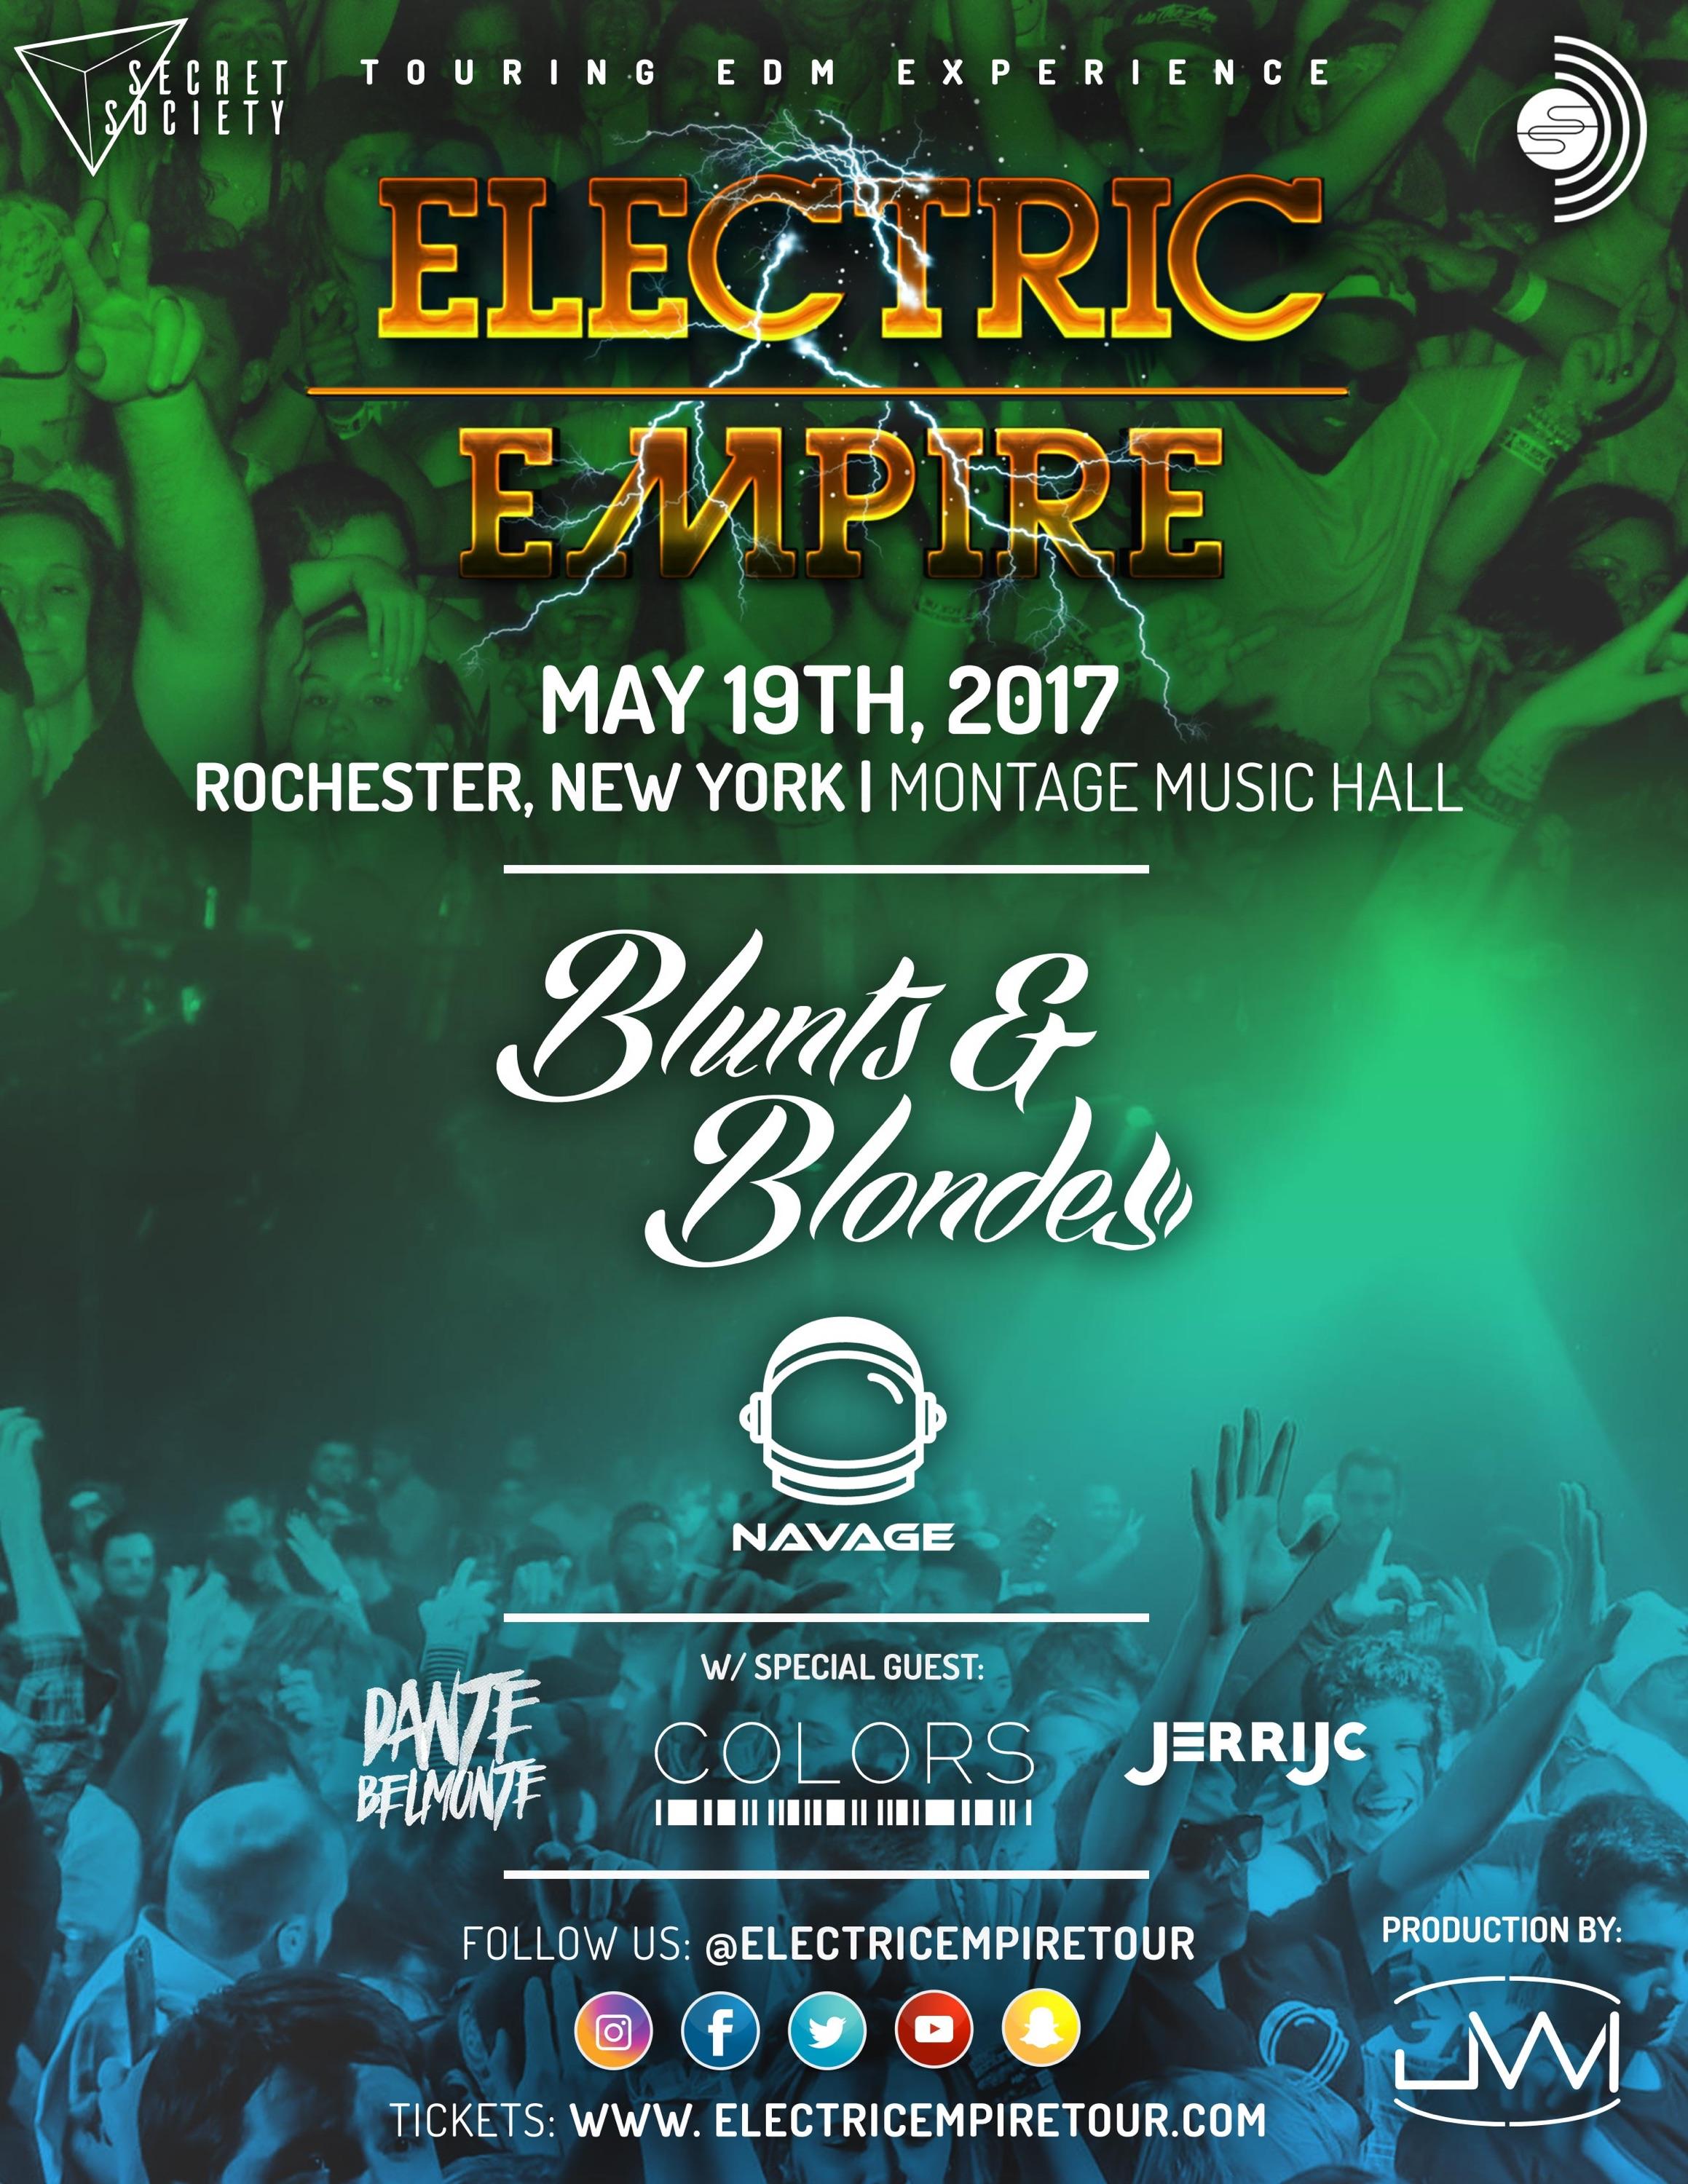 Electric Empire Tour @ Rochester, NY 5/19/17 w/ BLUNTS & BLONDES and NAVAGE